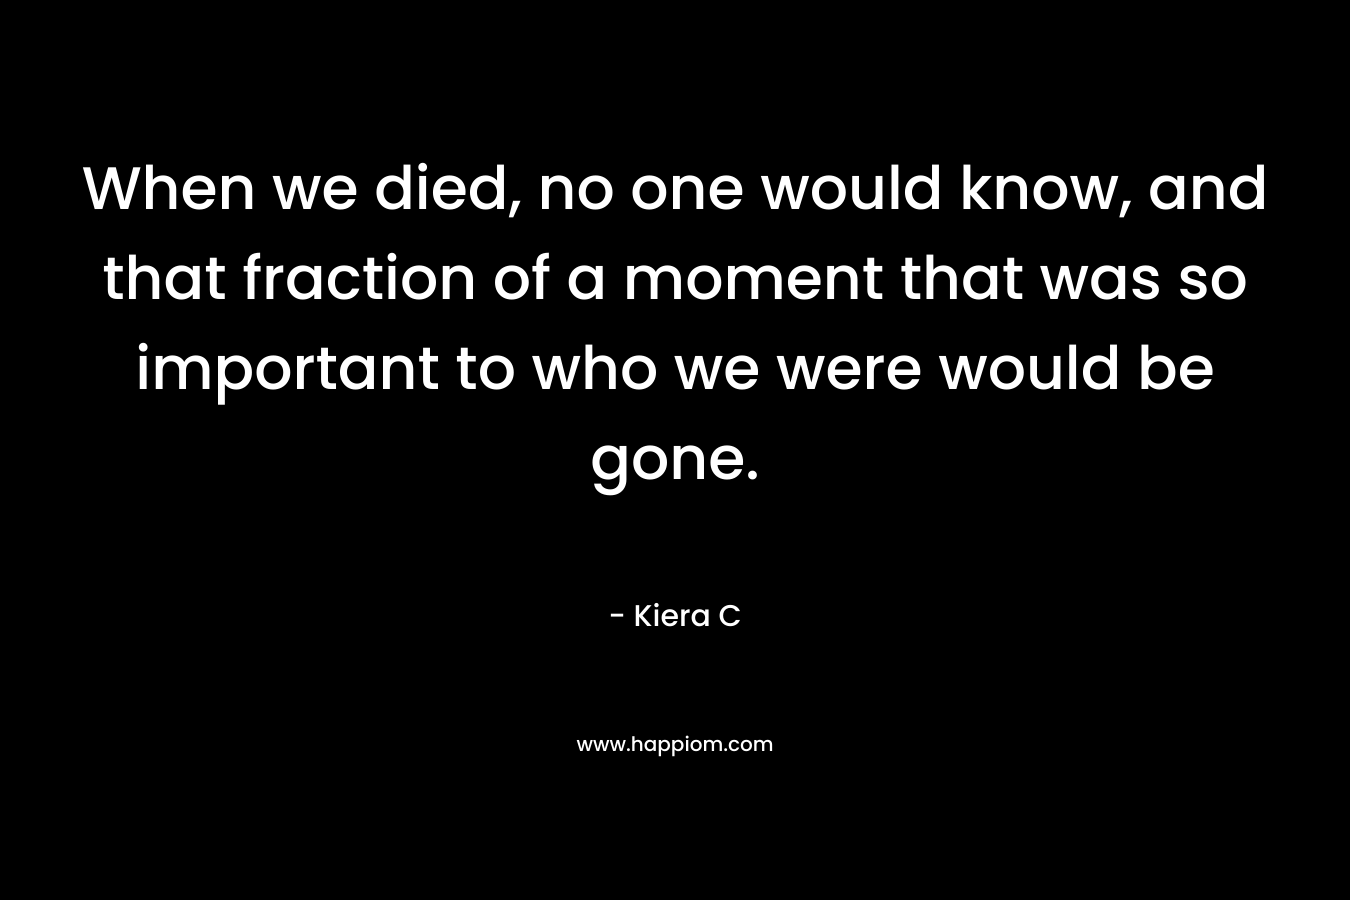 When we died, no one would know, and that fraction of a moment that was so important to who we were would be gone. – Kiera C